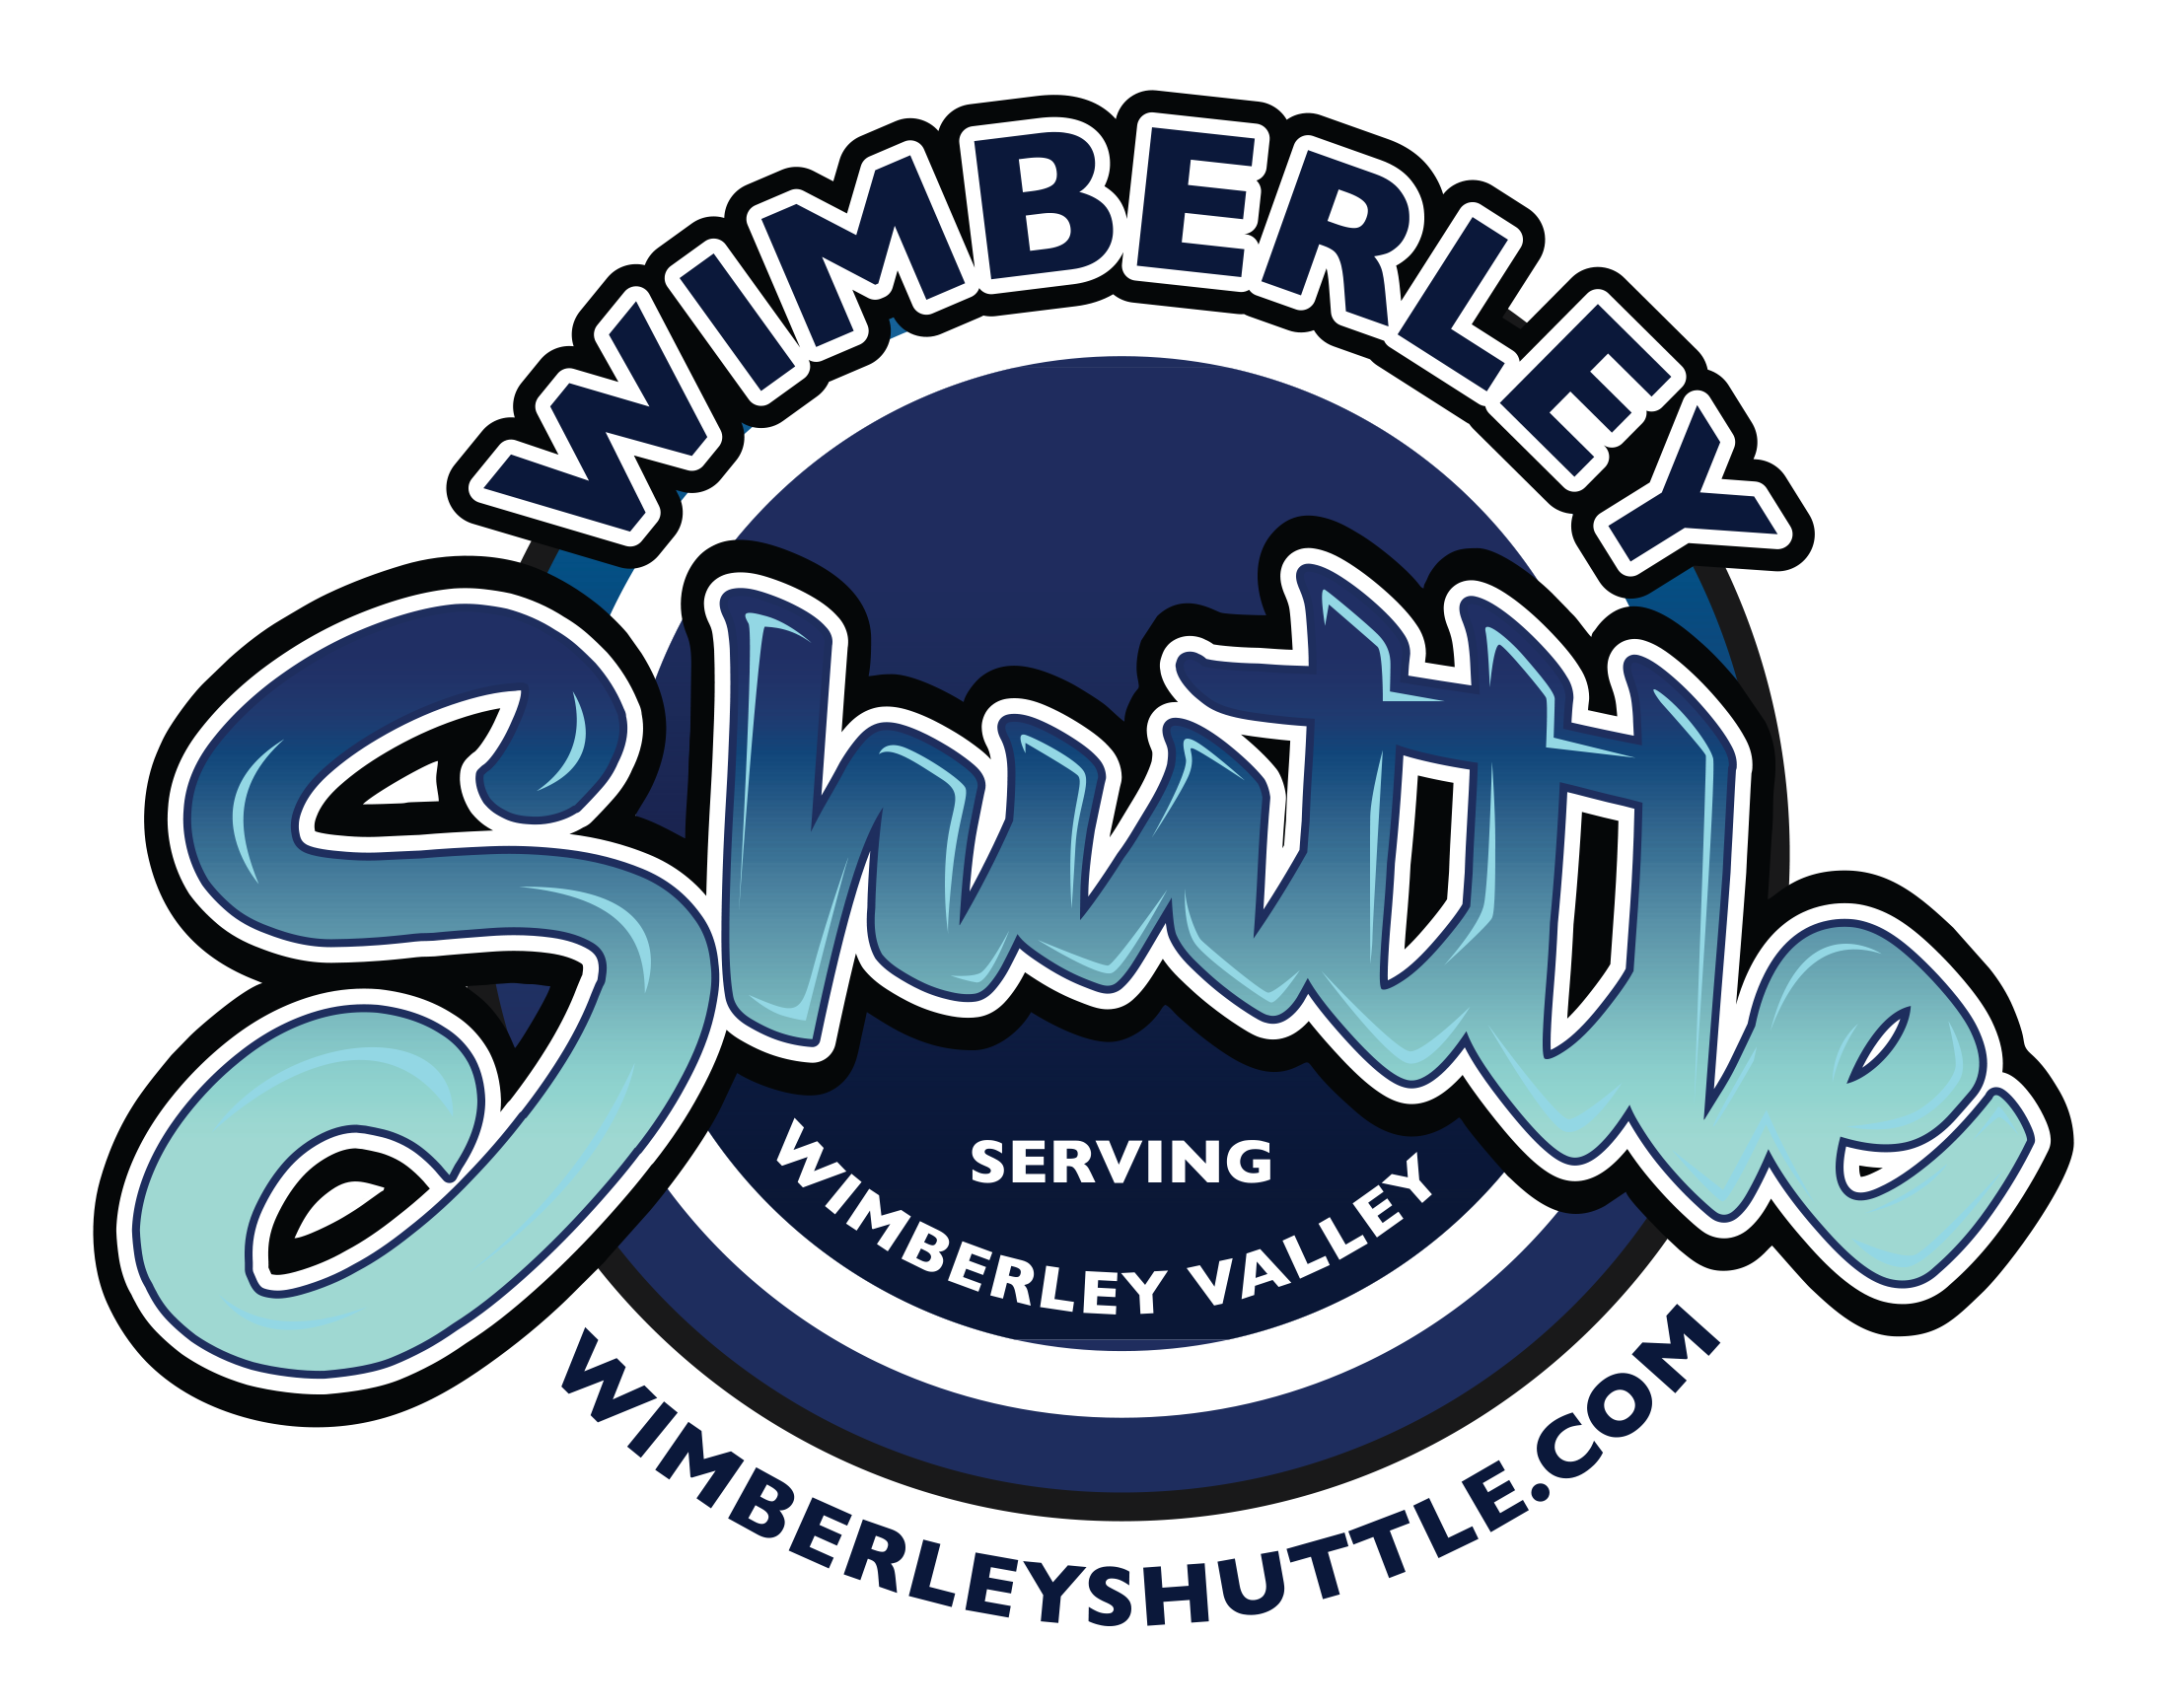 Image of Wimberley Shuttle on the square logo